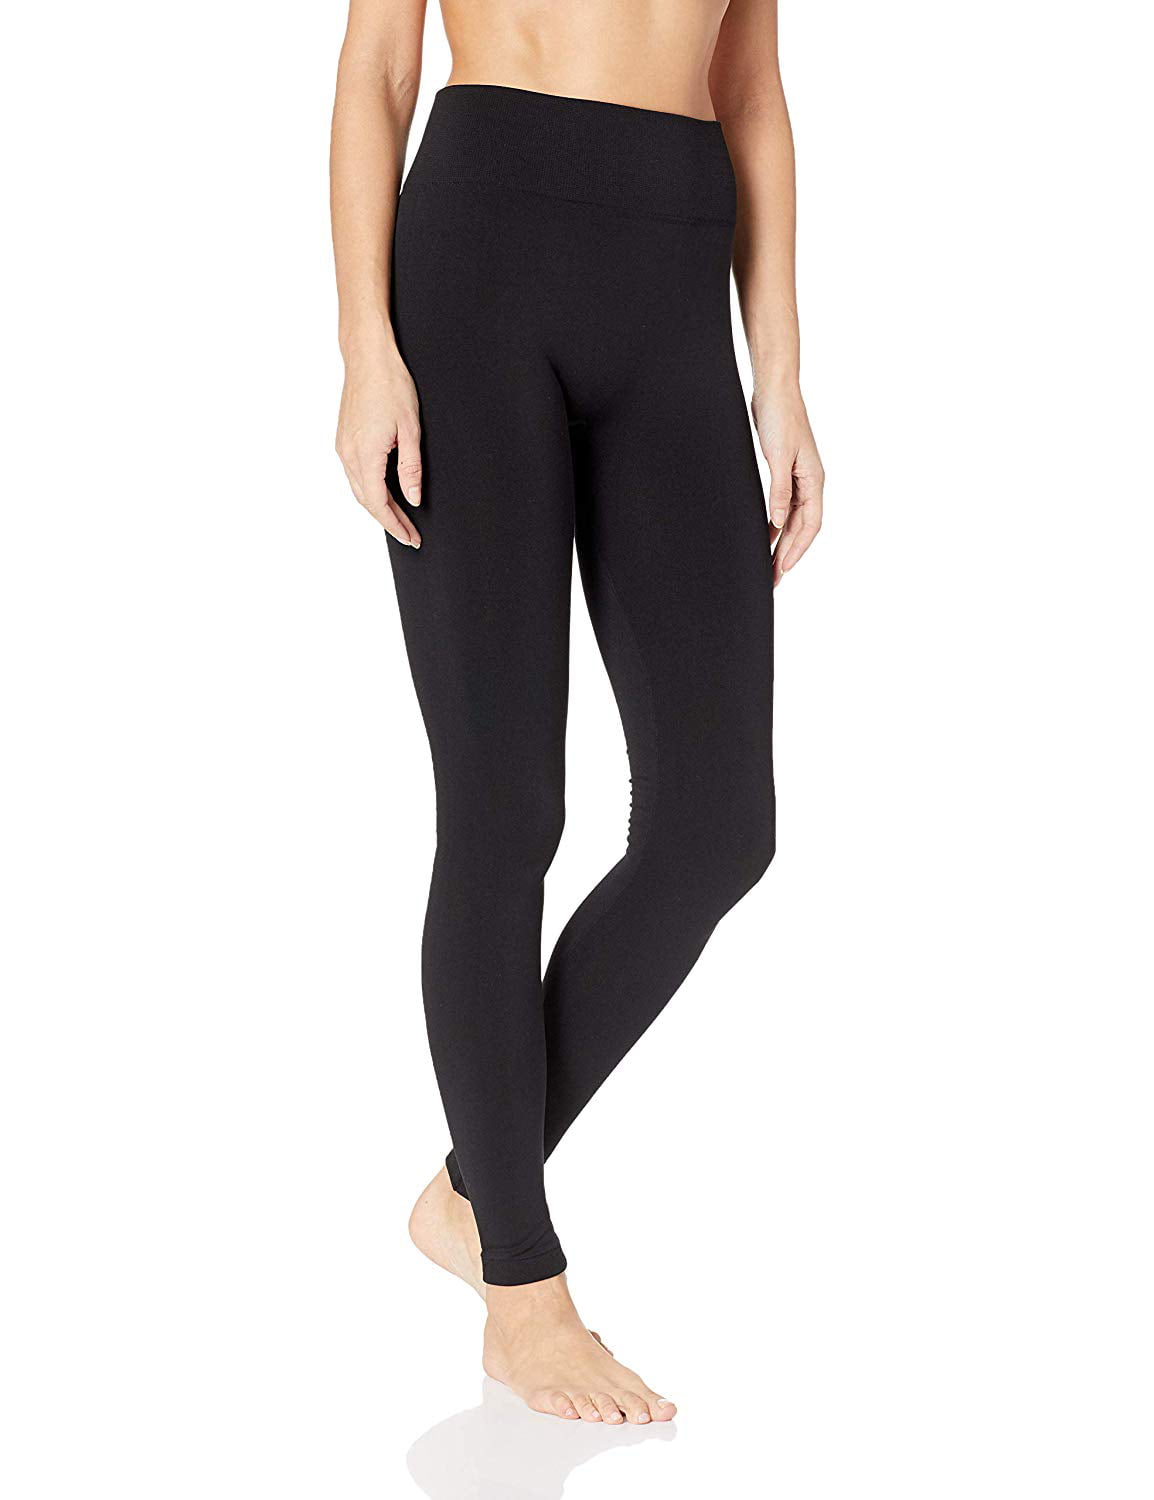 HUE Women’s Brushed Seamless Leggings, Assorted, Black – Solid, L/XL ...